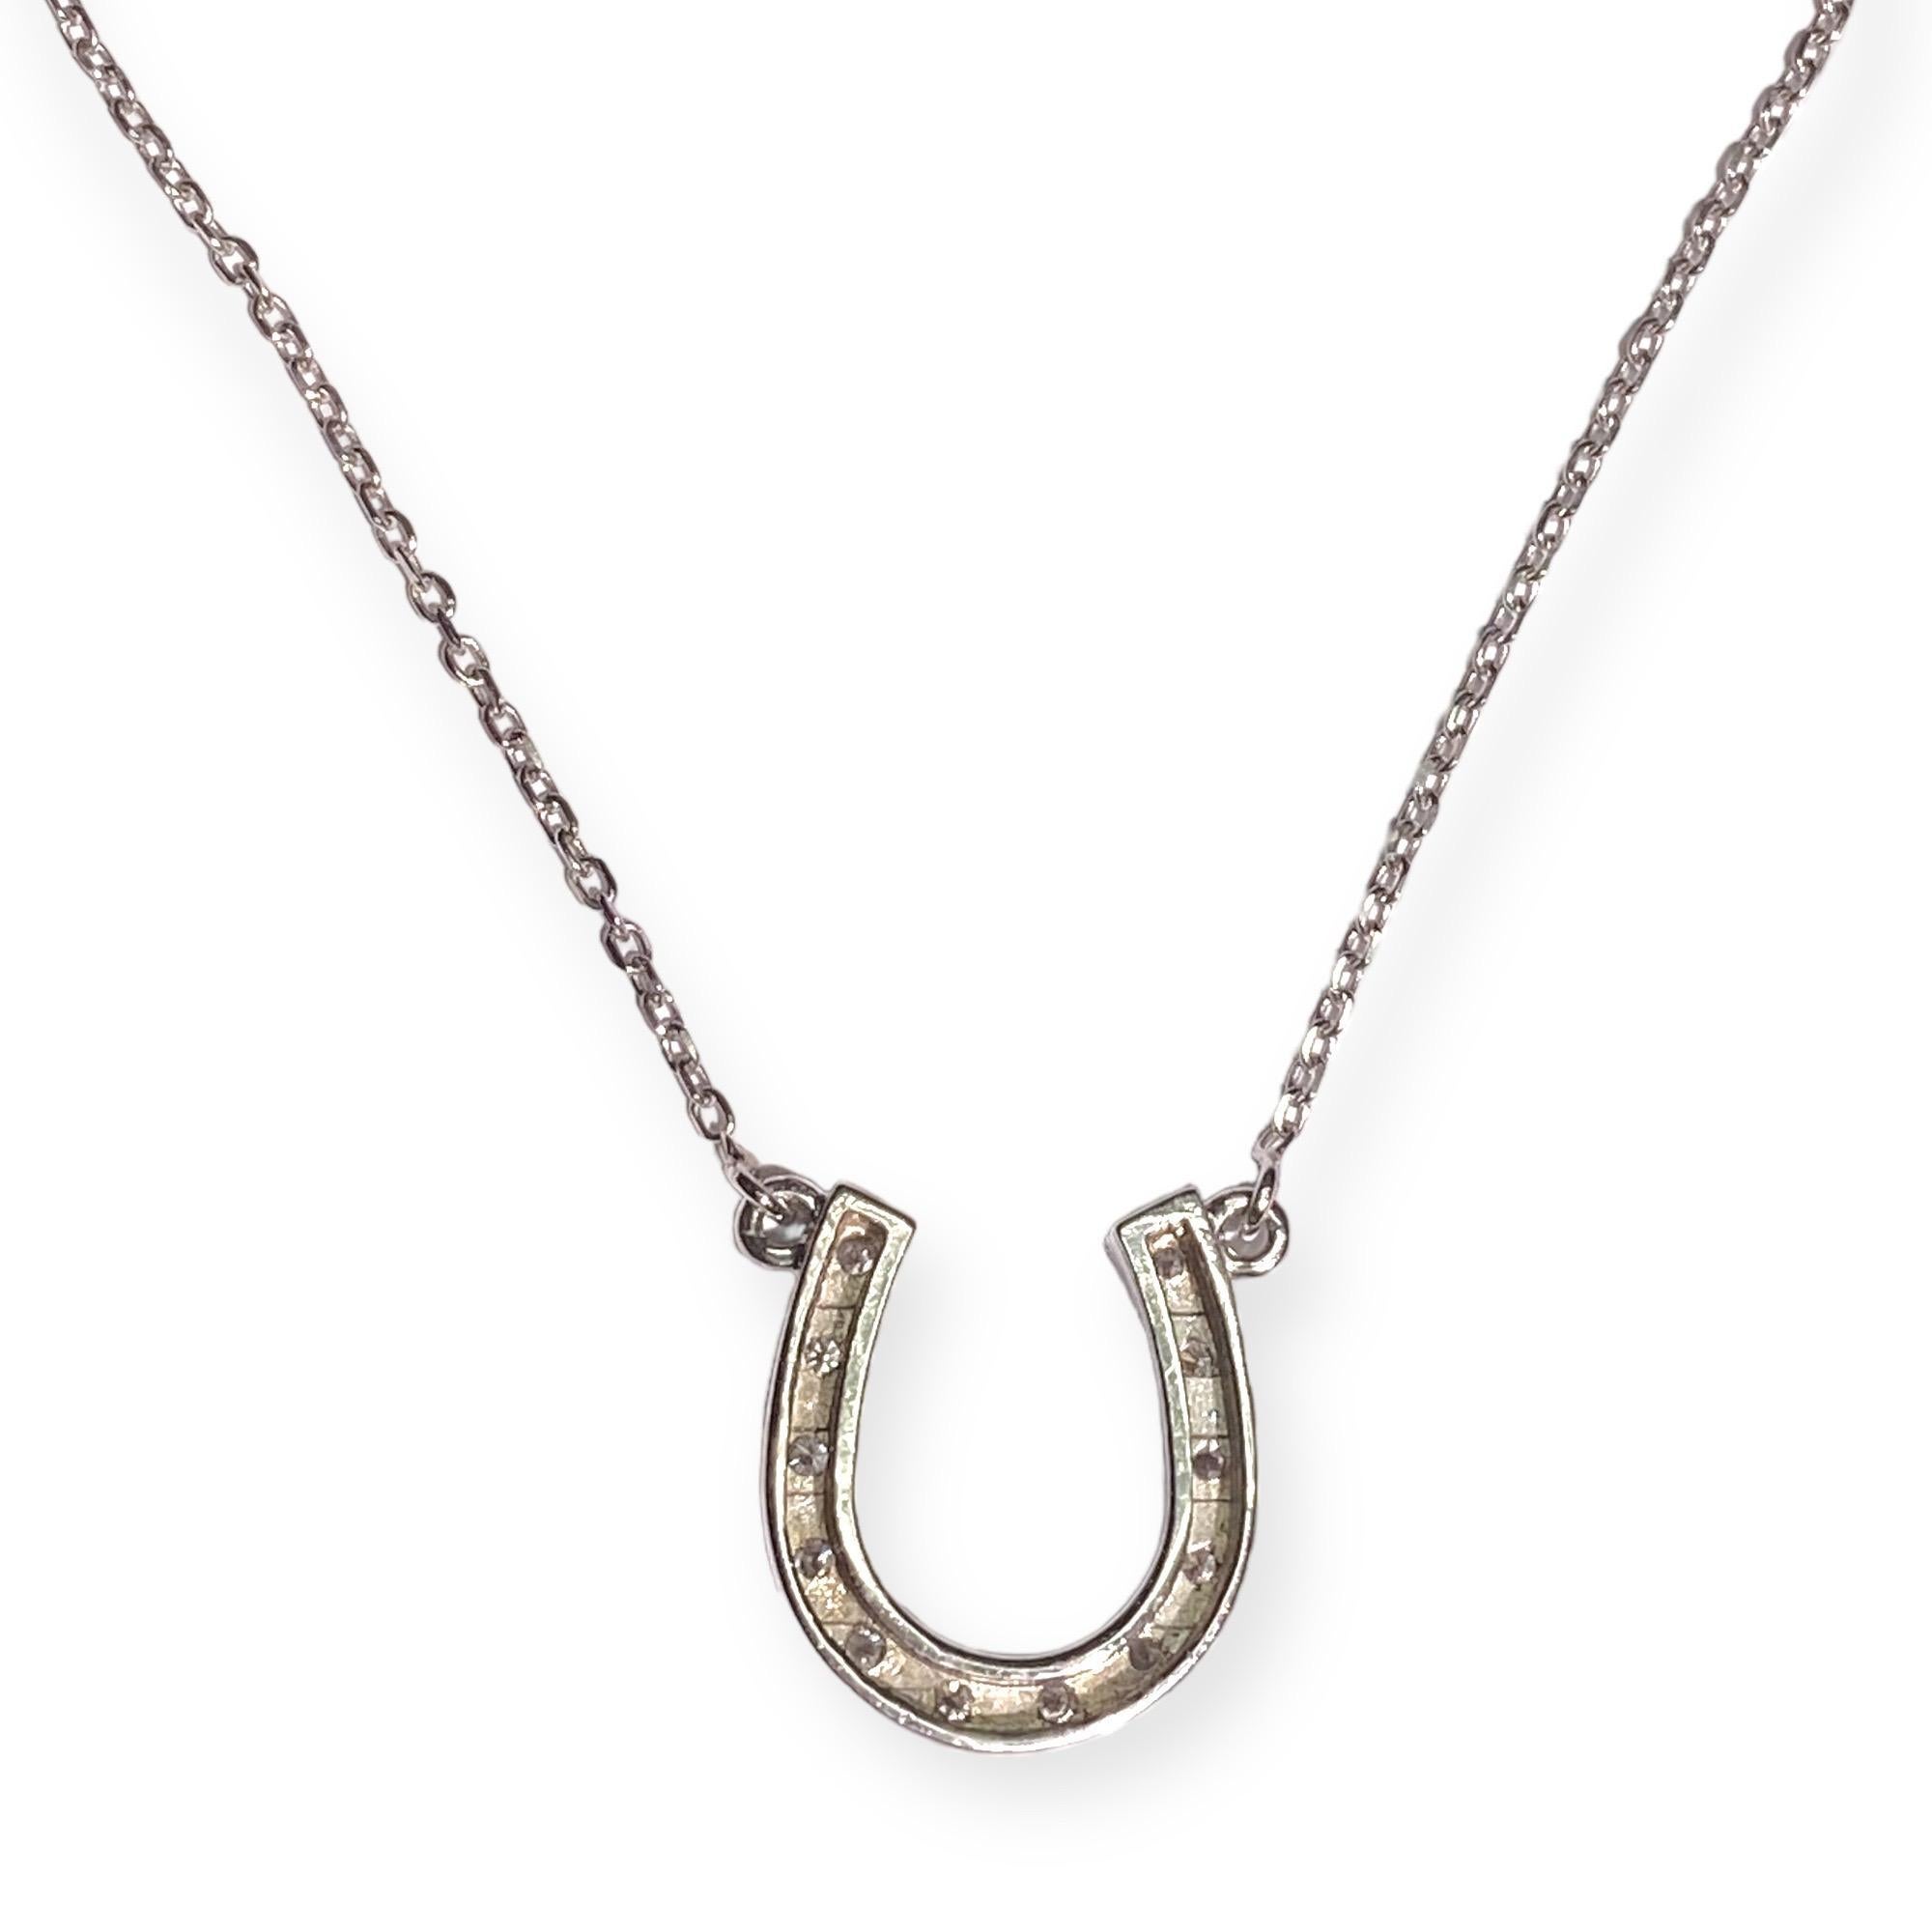 Vintage 14K White Gold Diamond Horseshoe Necklace In Good Condition For Sale In Henderson, NV